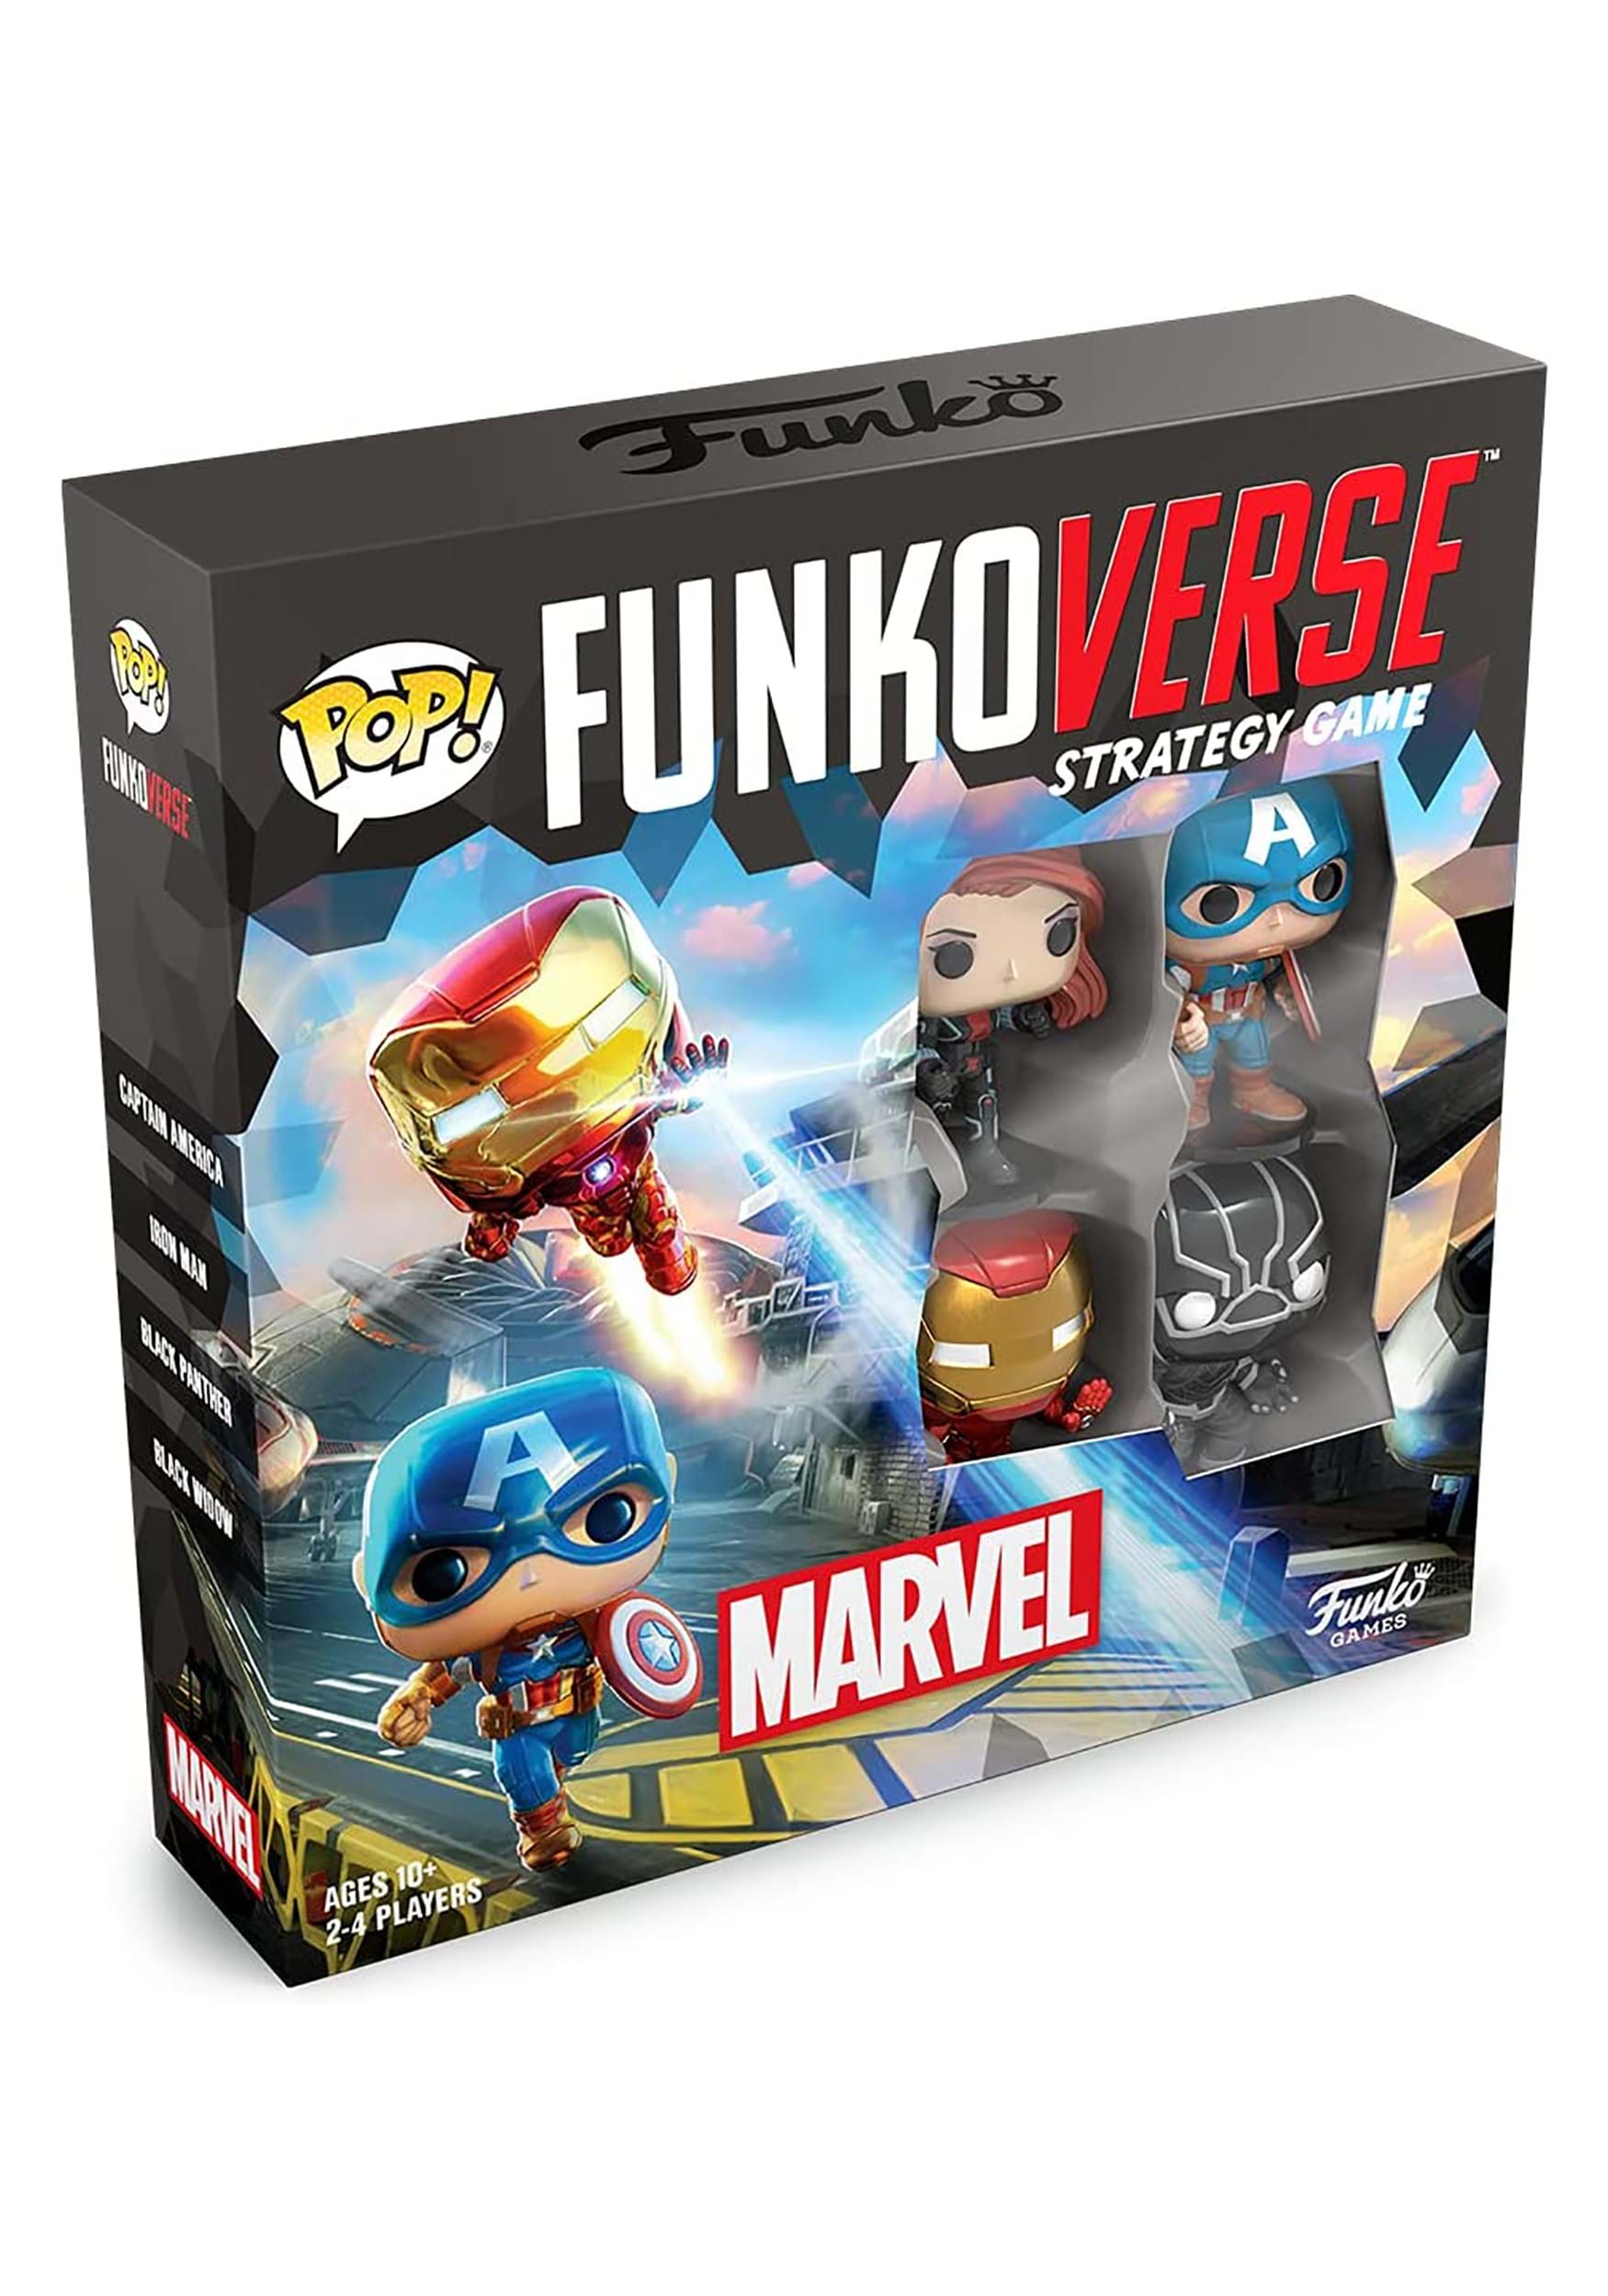 Funkoverse Marvel 100 4-Pack Strategy Game